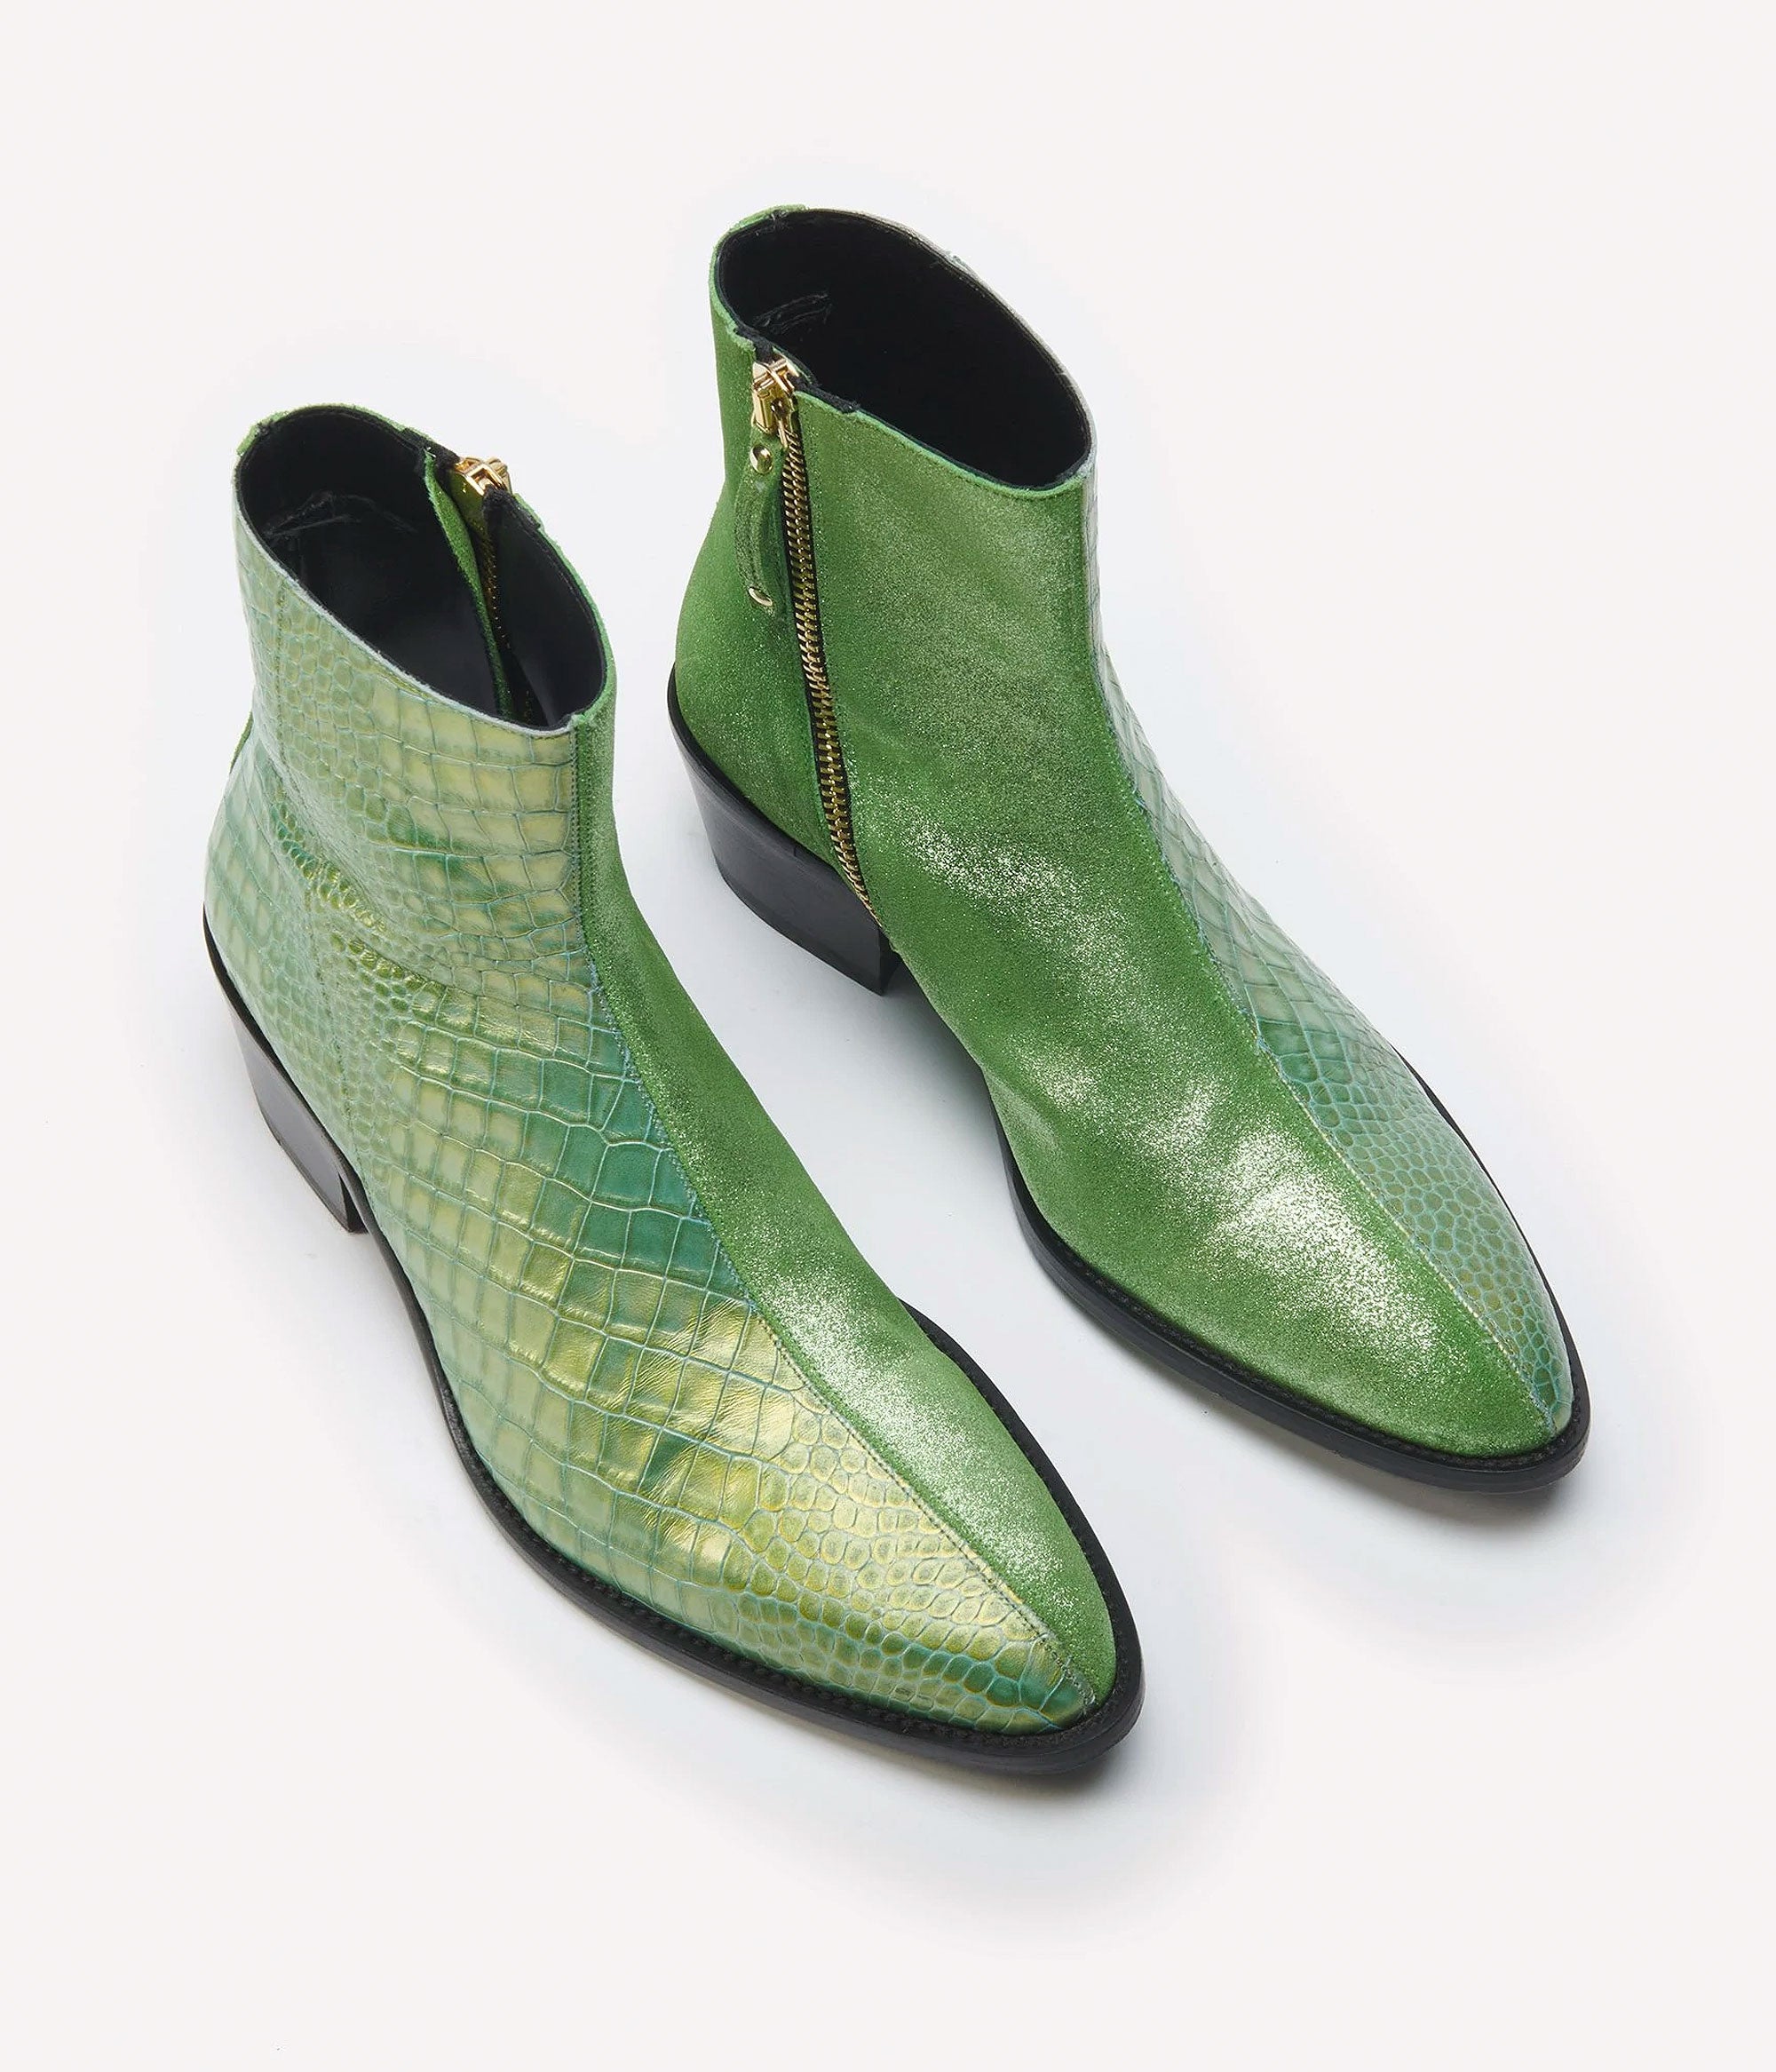 HUMAN RECREATIONAL SERVICES LUTHER BOOT IN GREEN ITALIAN LEATHER